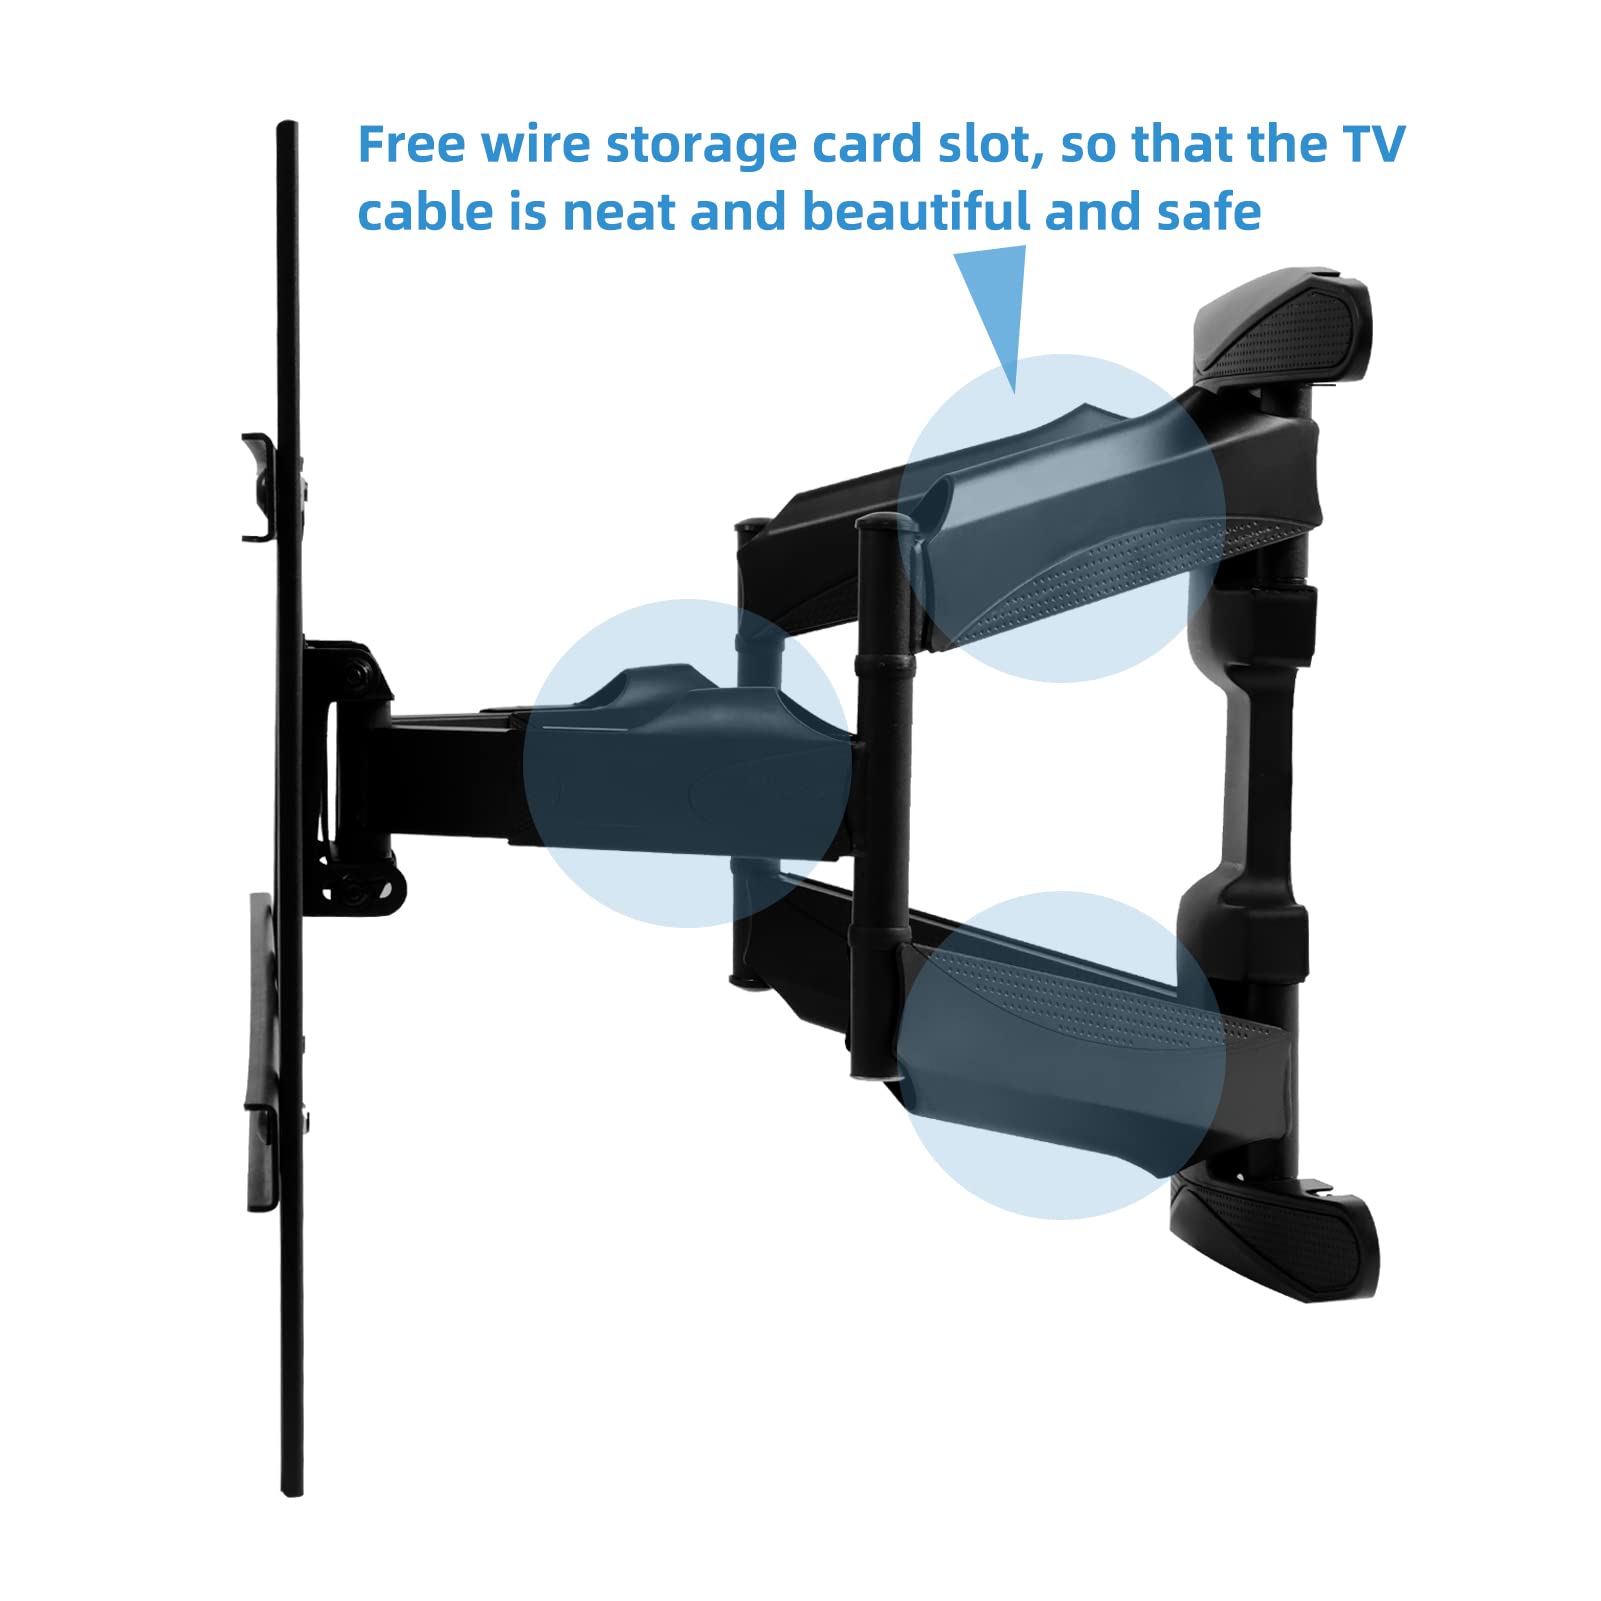 SYLVOX Full Motion Outdoor TV Wall Mount, Fits for TV Size from 40 Inch to 75 Inch, Flexible 6 Articulating Dual Arms, Wall Mount Bracket, Maximum VESA 700 x 400 mm